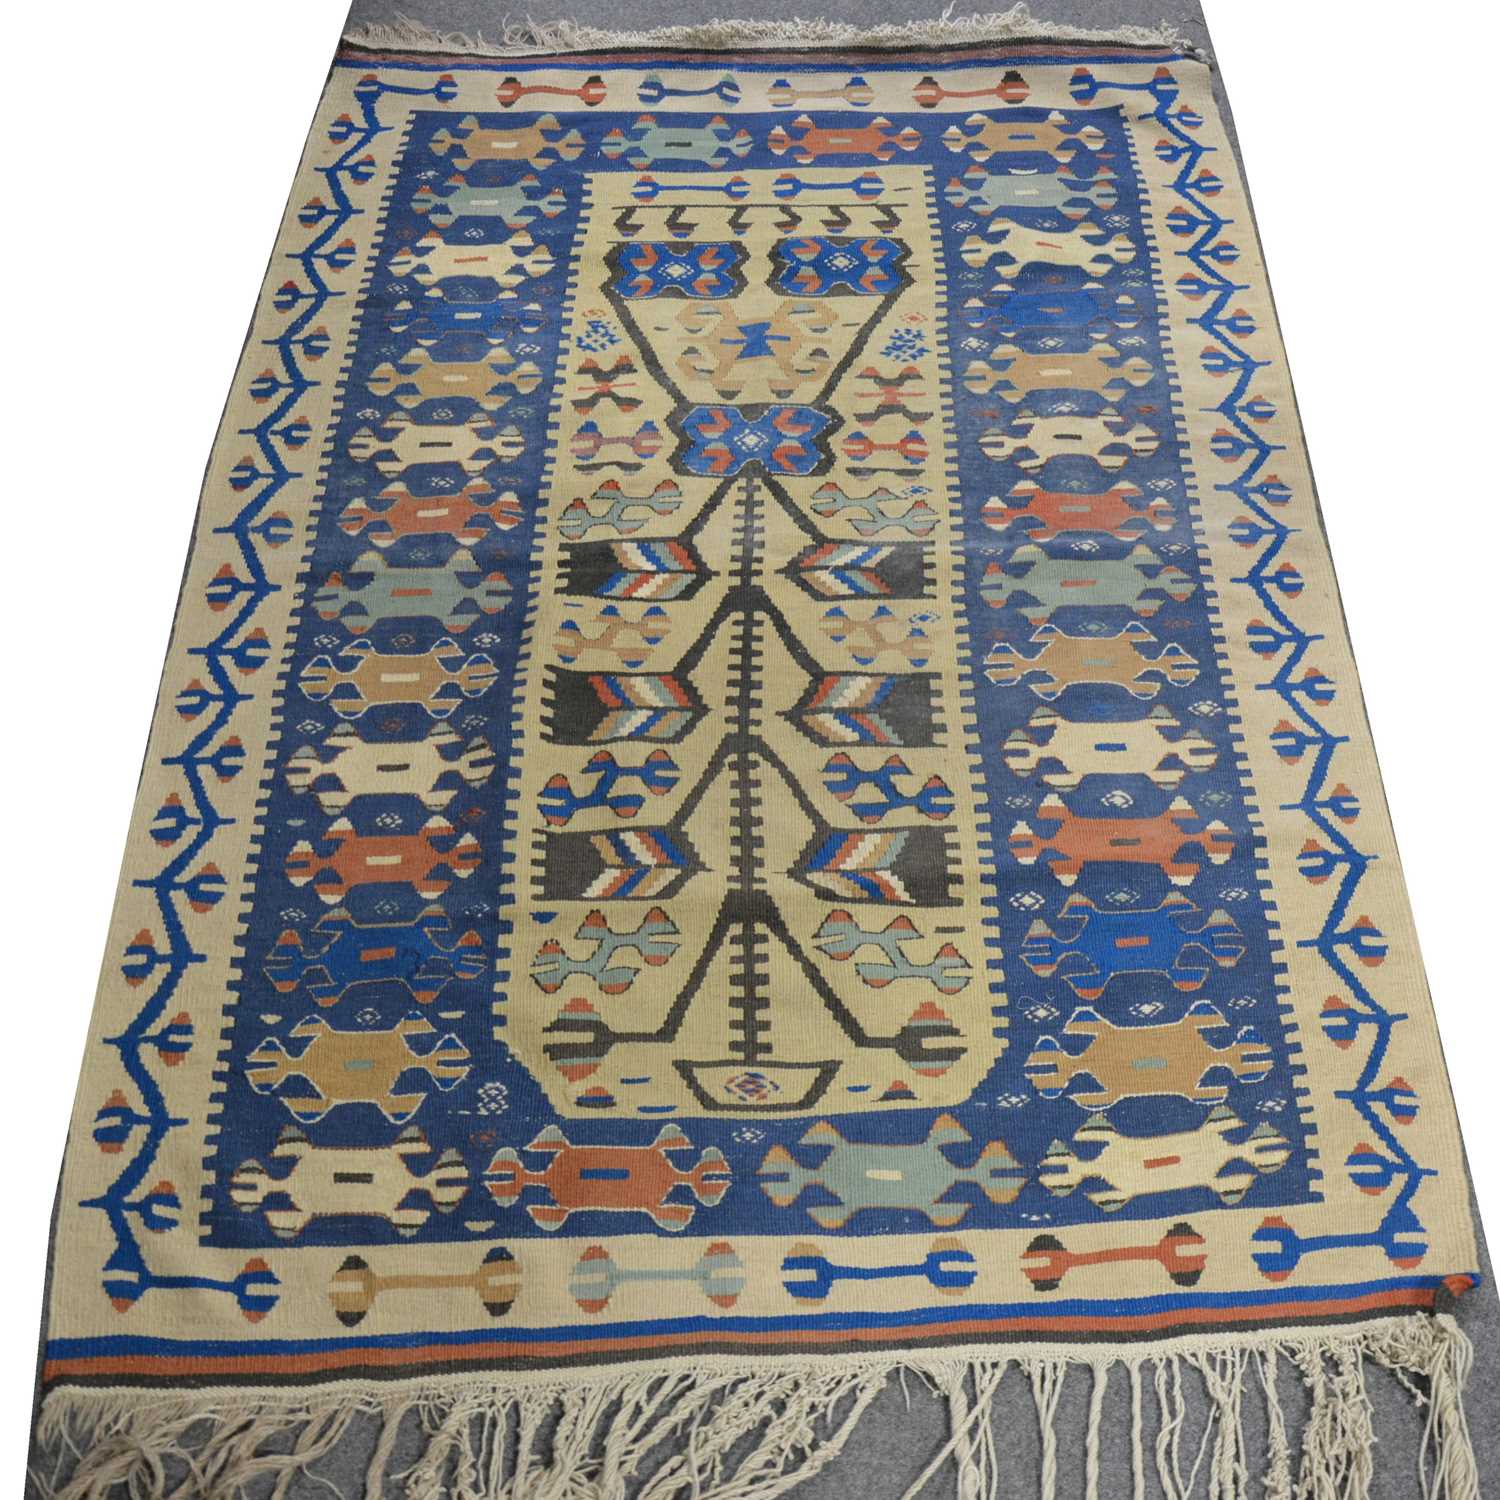 Lot 133 - Kilim carpet, beige and blue ground with geometric patterns